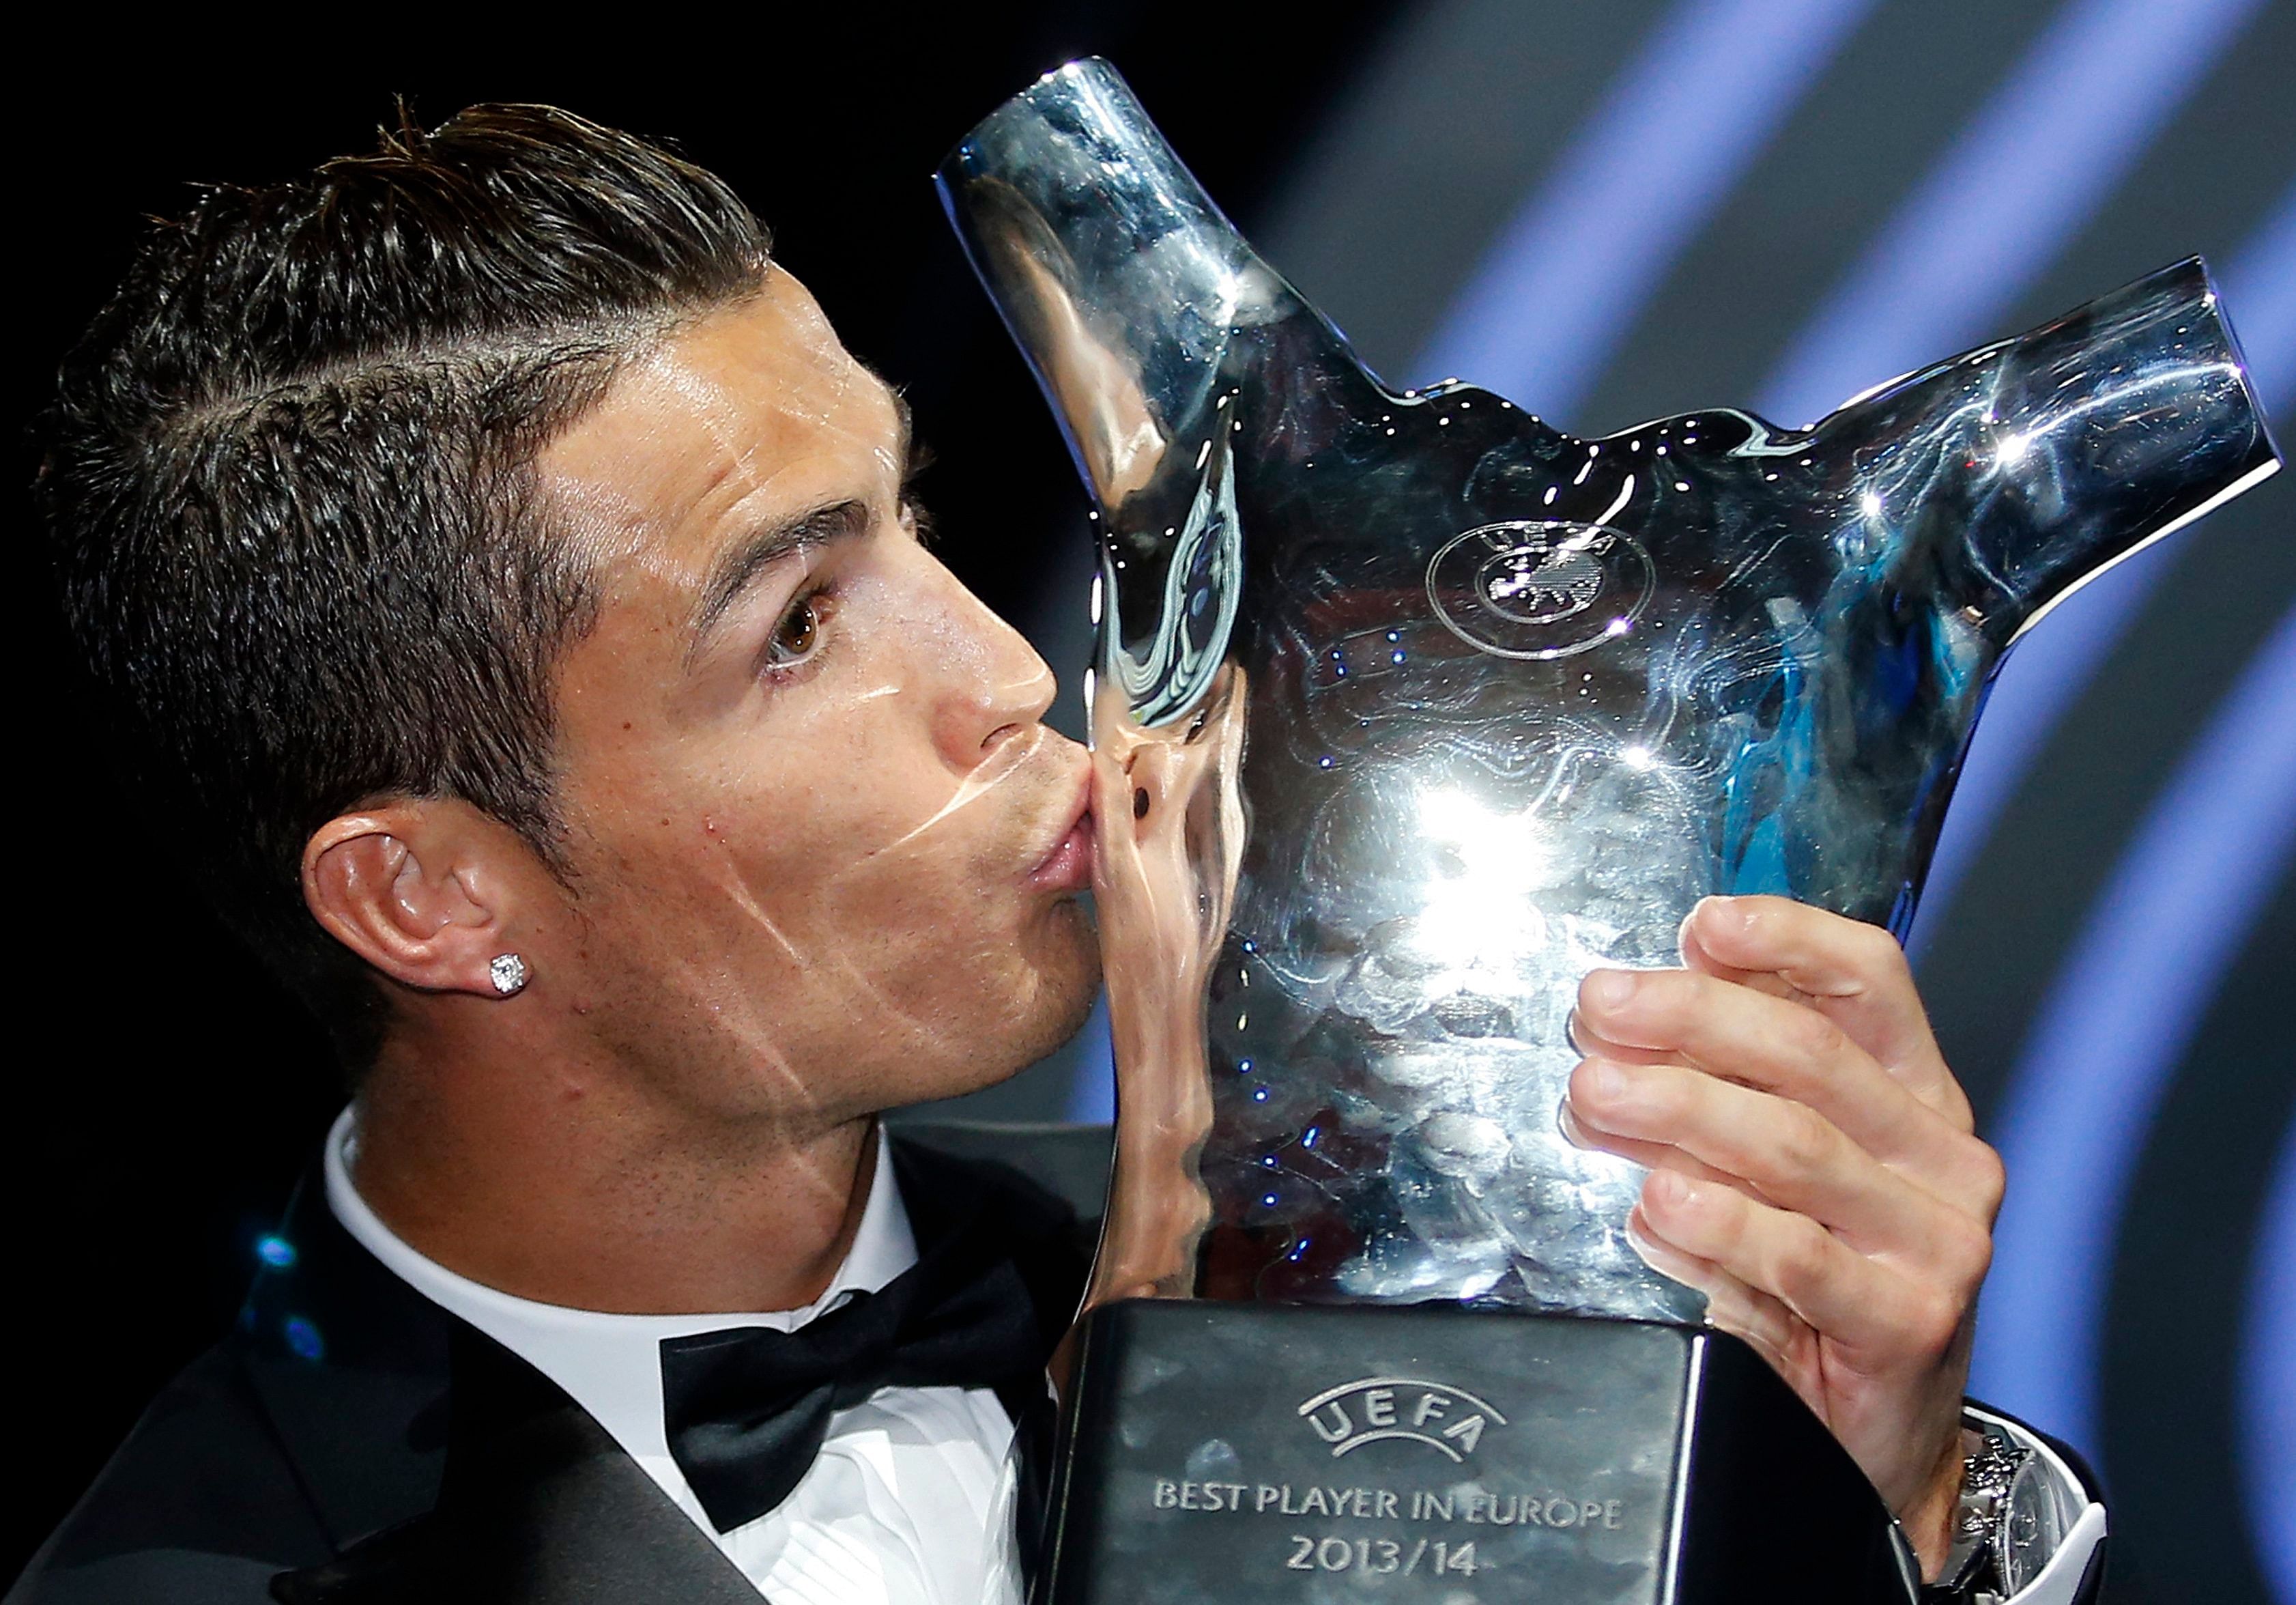 After winning his second consecutive Ballon d'Or football award and third overall, Portuguese forward Cristiano Ronaldo has set his sights on Argentine striker Lionel Messi's achievement of winning the coveted prize a record four times.Reuters FIle Photo